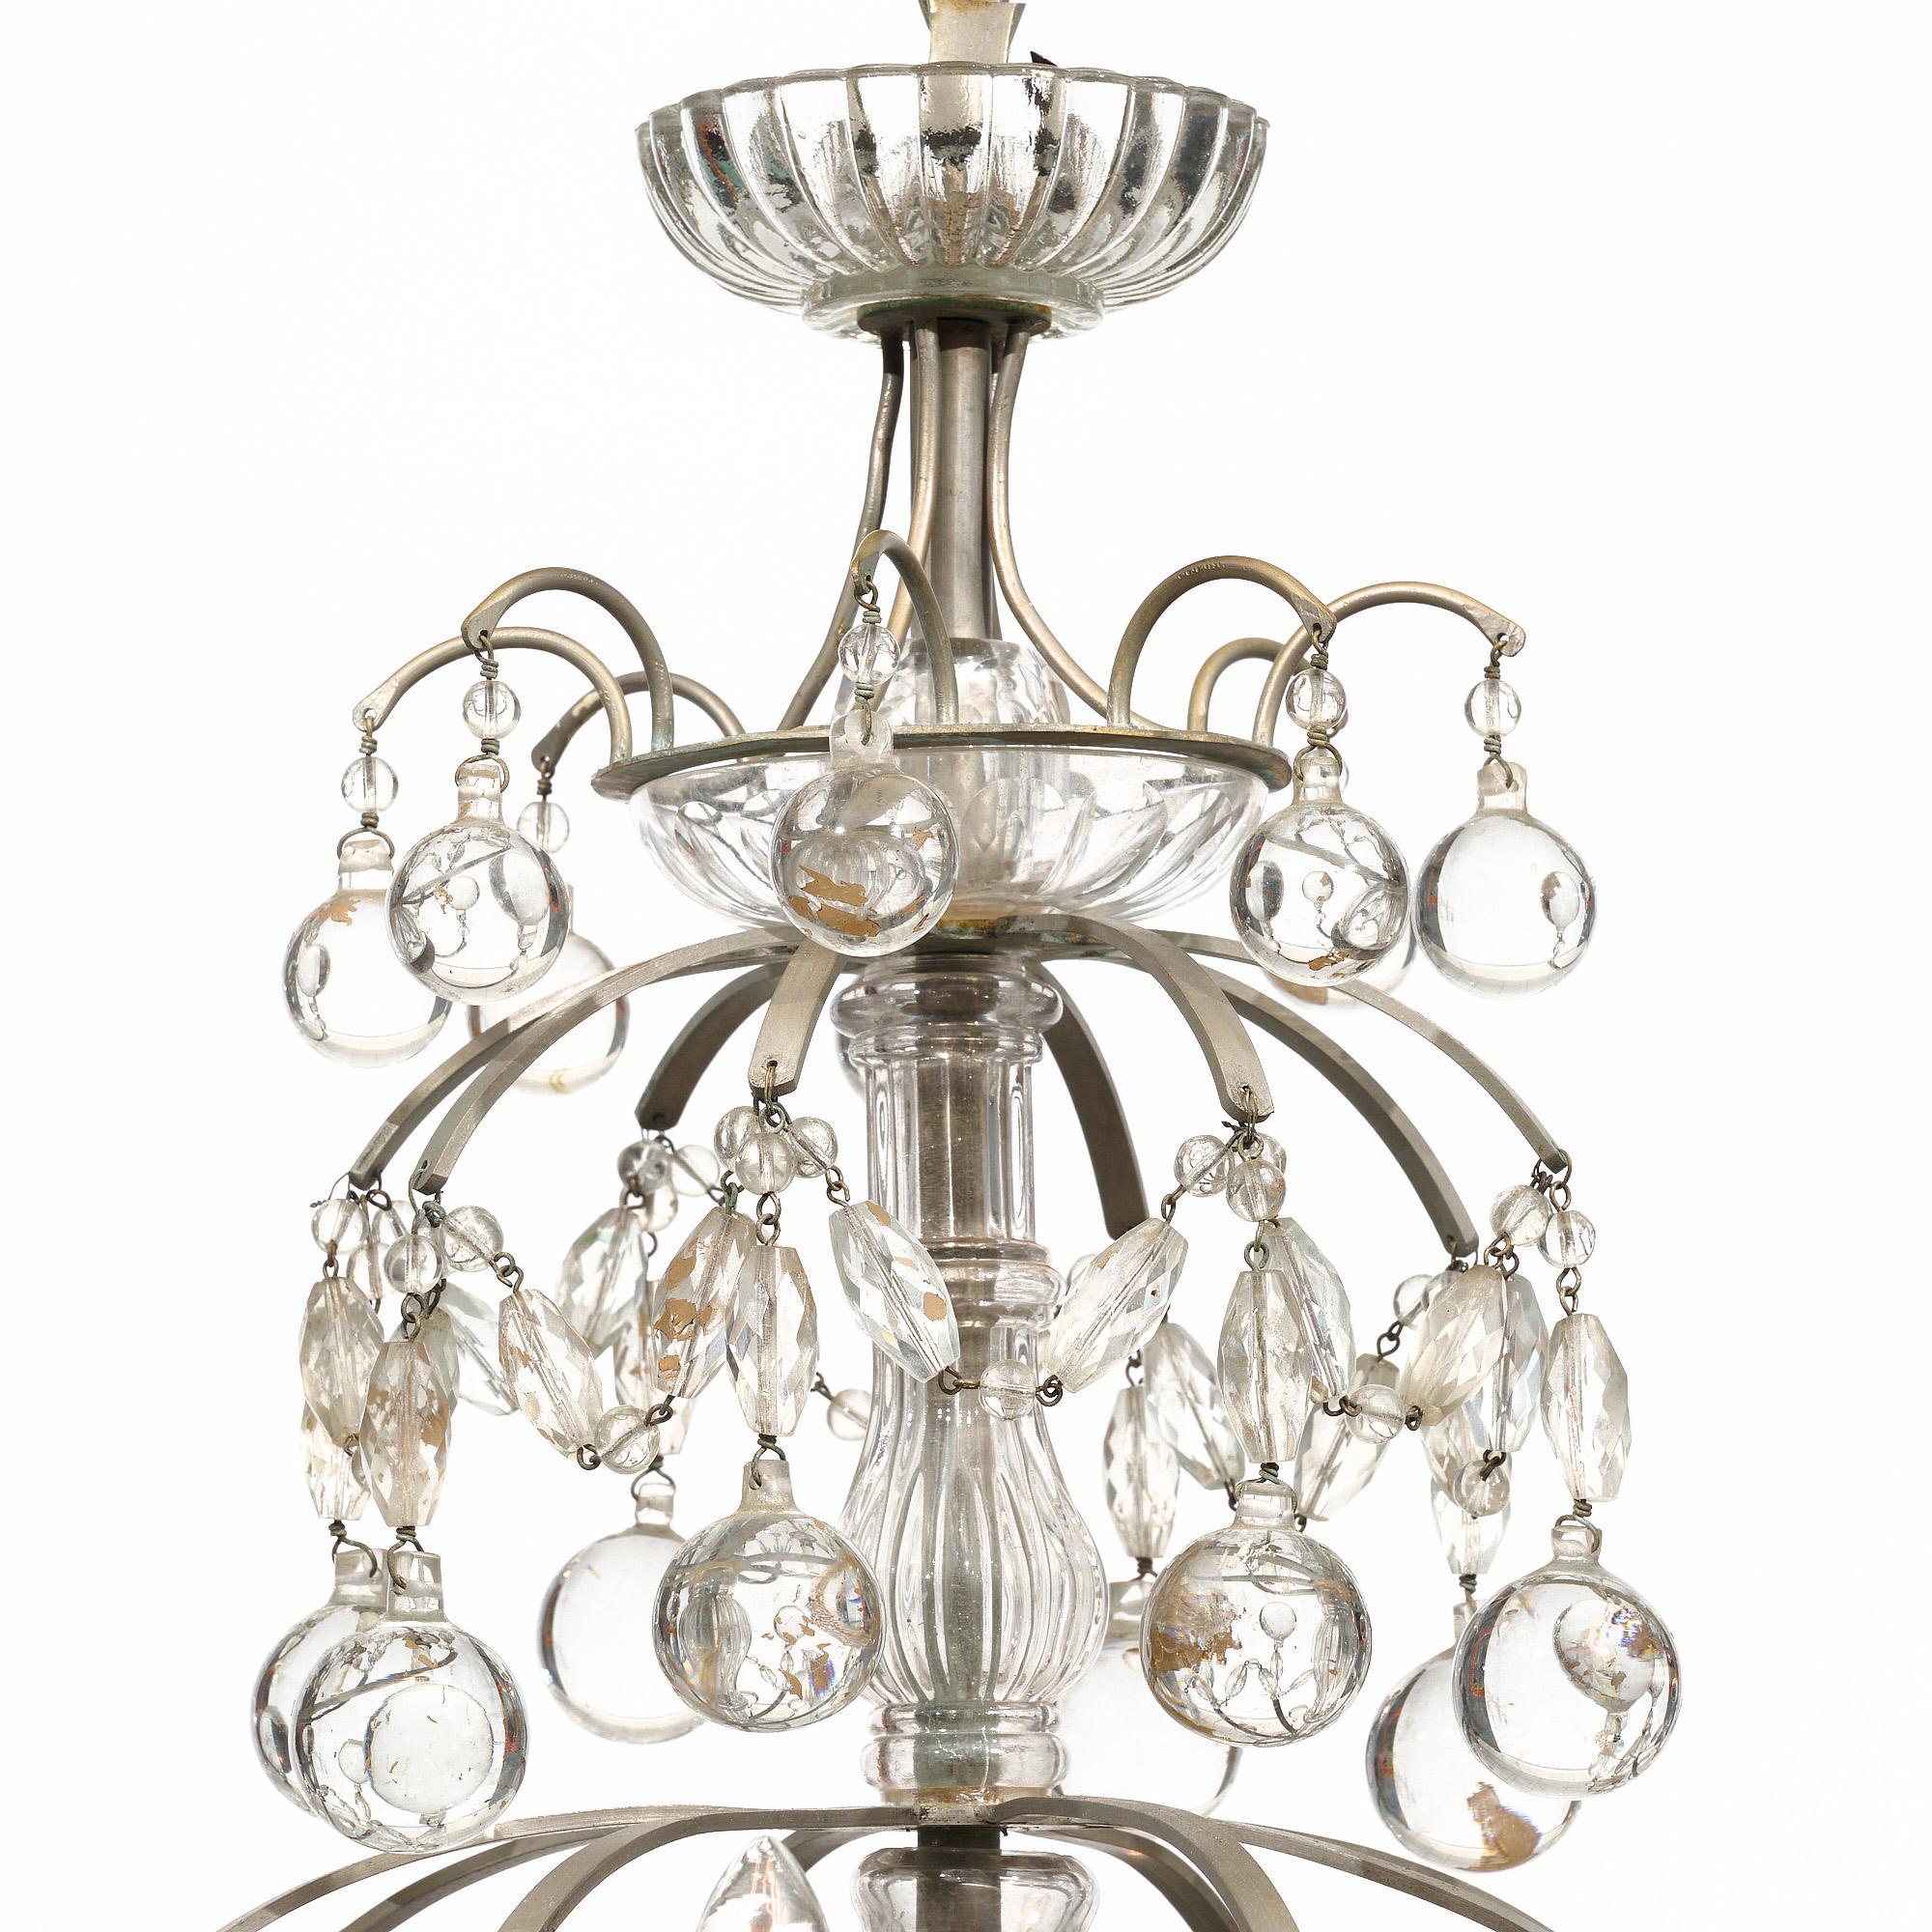 Art Deco French Antique Baccarat Chandelier For Sale